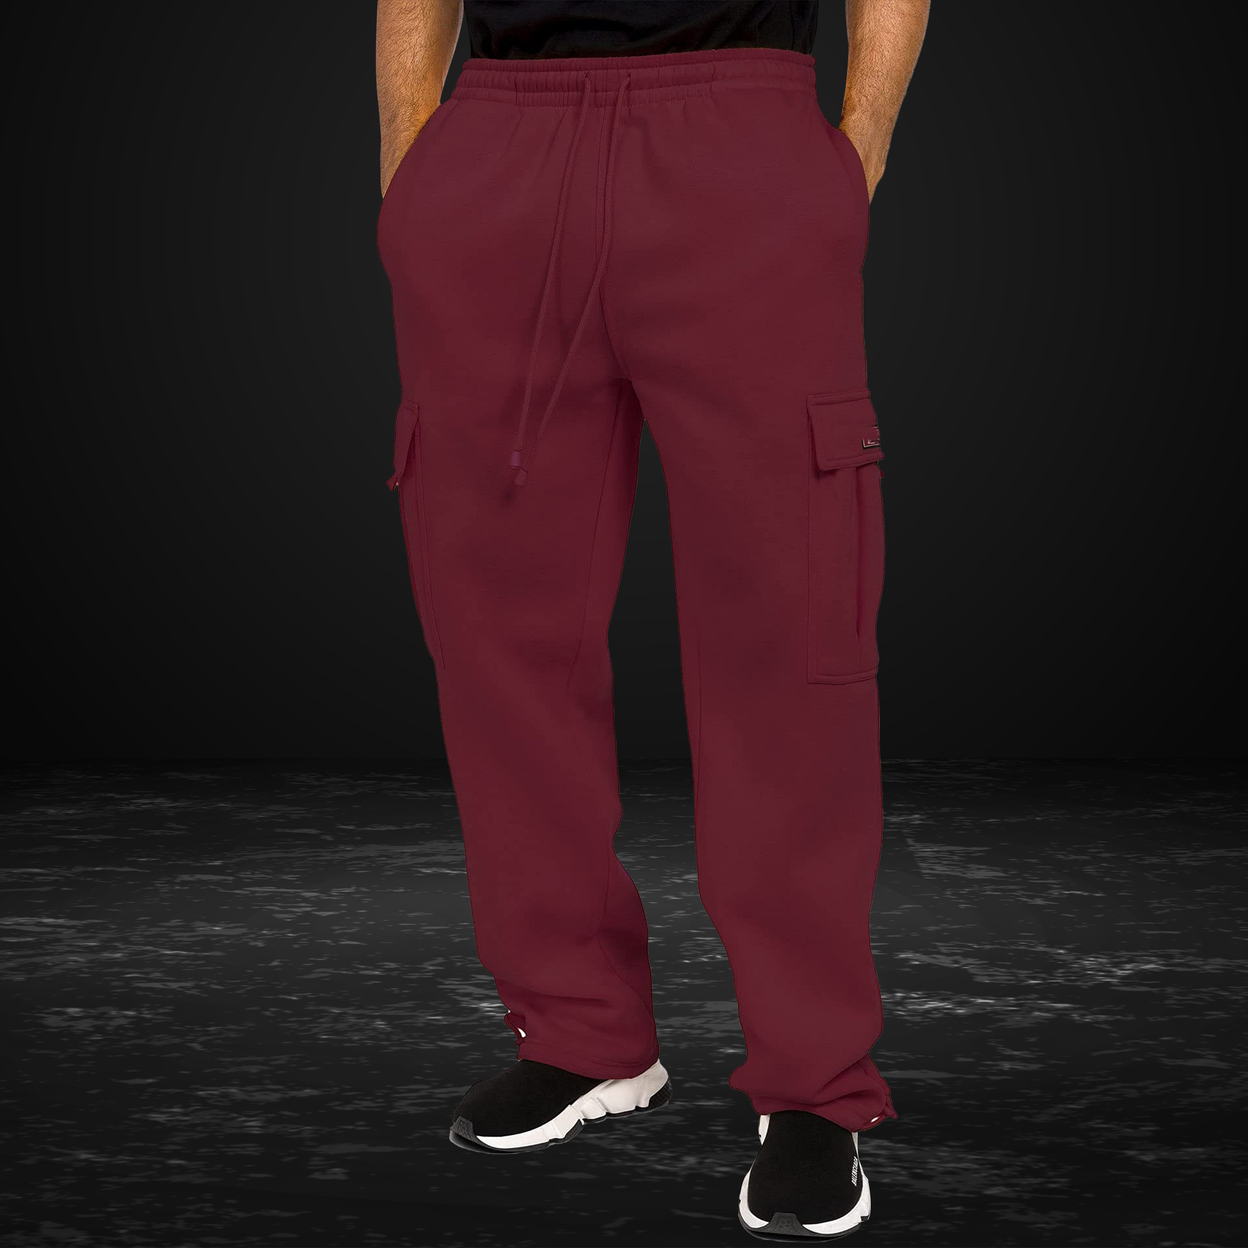 Multipack Men's Casual Solid Cargo Jogger Sweatpants With Pockets - 3, M